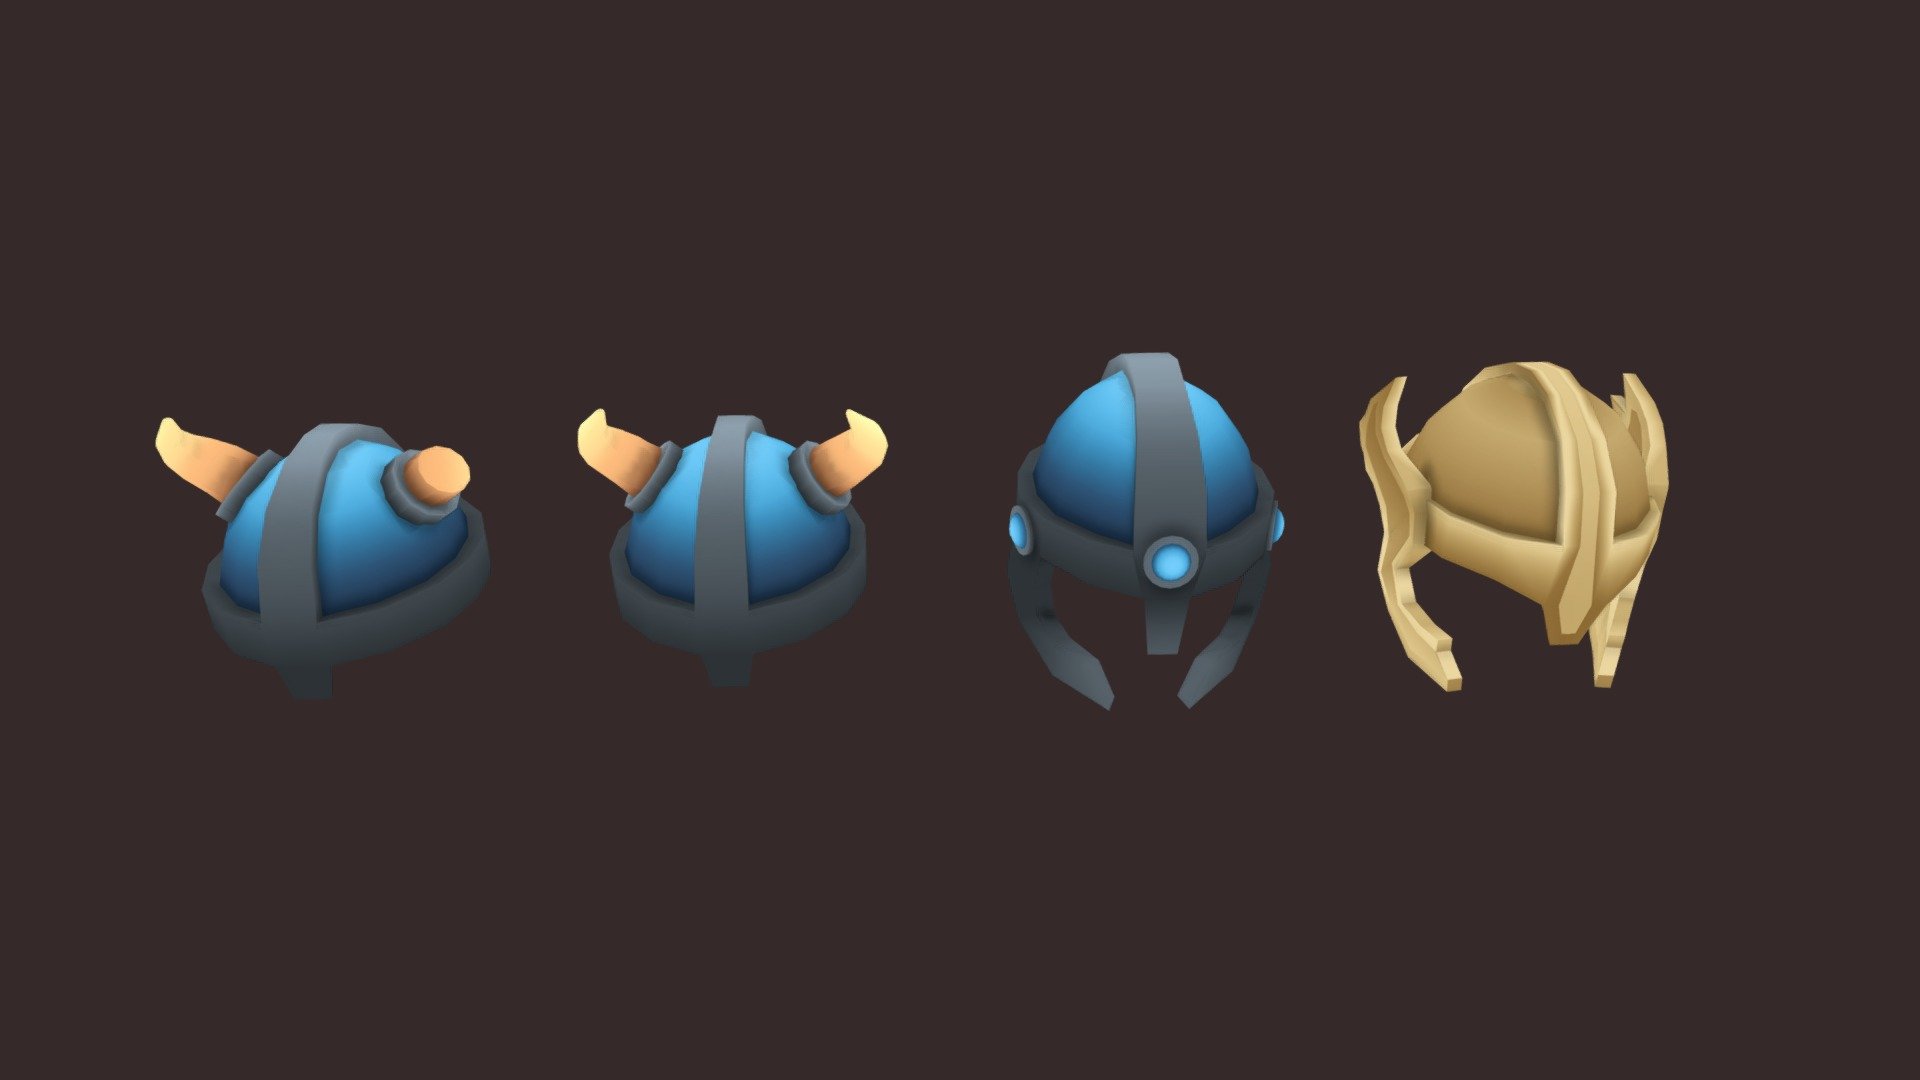 This is a part of my Stylised Viking Assetpack series. All assets from the packs will use the same texture file for each and every object. Apart from this I also make the models lowpoly so that you will have the best of optimisation for your game or other project you will use this for.

Content of the pack




1 horned viking helmet

1 broken horned viking helmet

1 face covering helmet

1 valkyrie helmet

Technical Details

1 Texture with size: 1024 x 1024 (fits all assets from the viking asset packs collection)

Make sure to check my page for future updates to the Stylised Viking Assetpacks 3d model